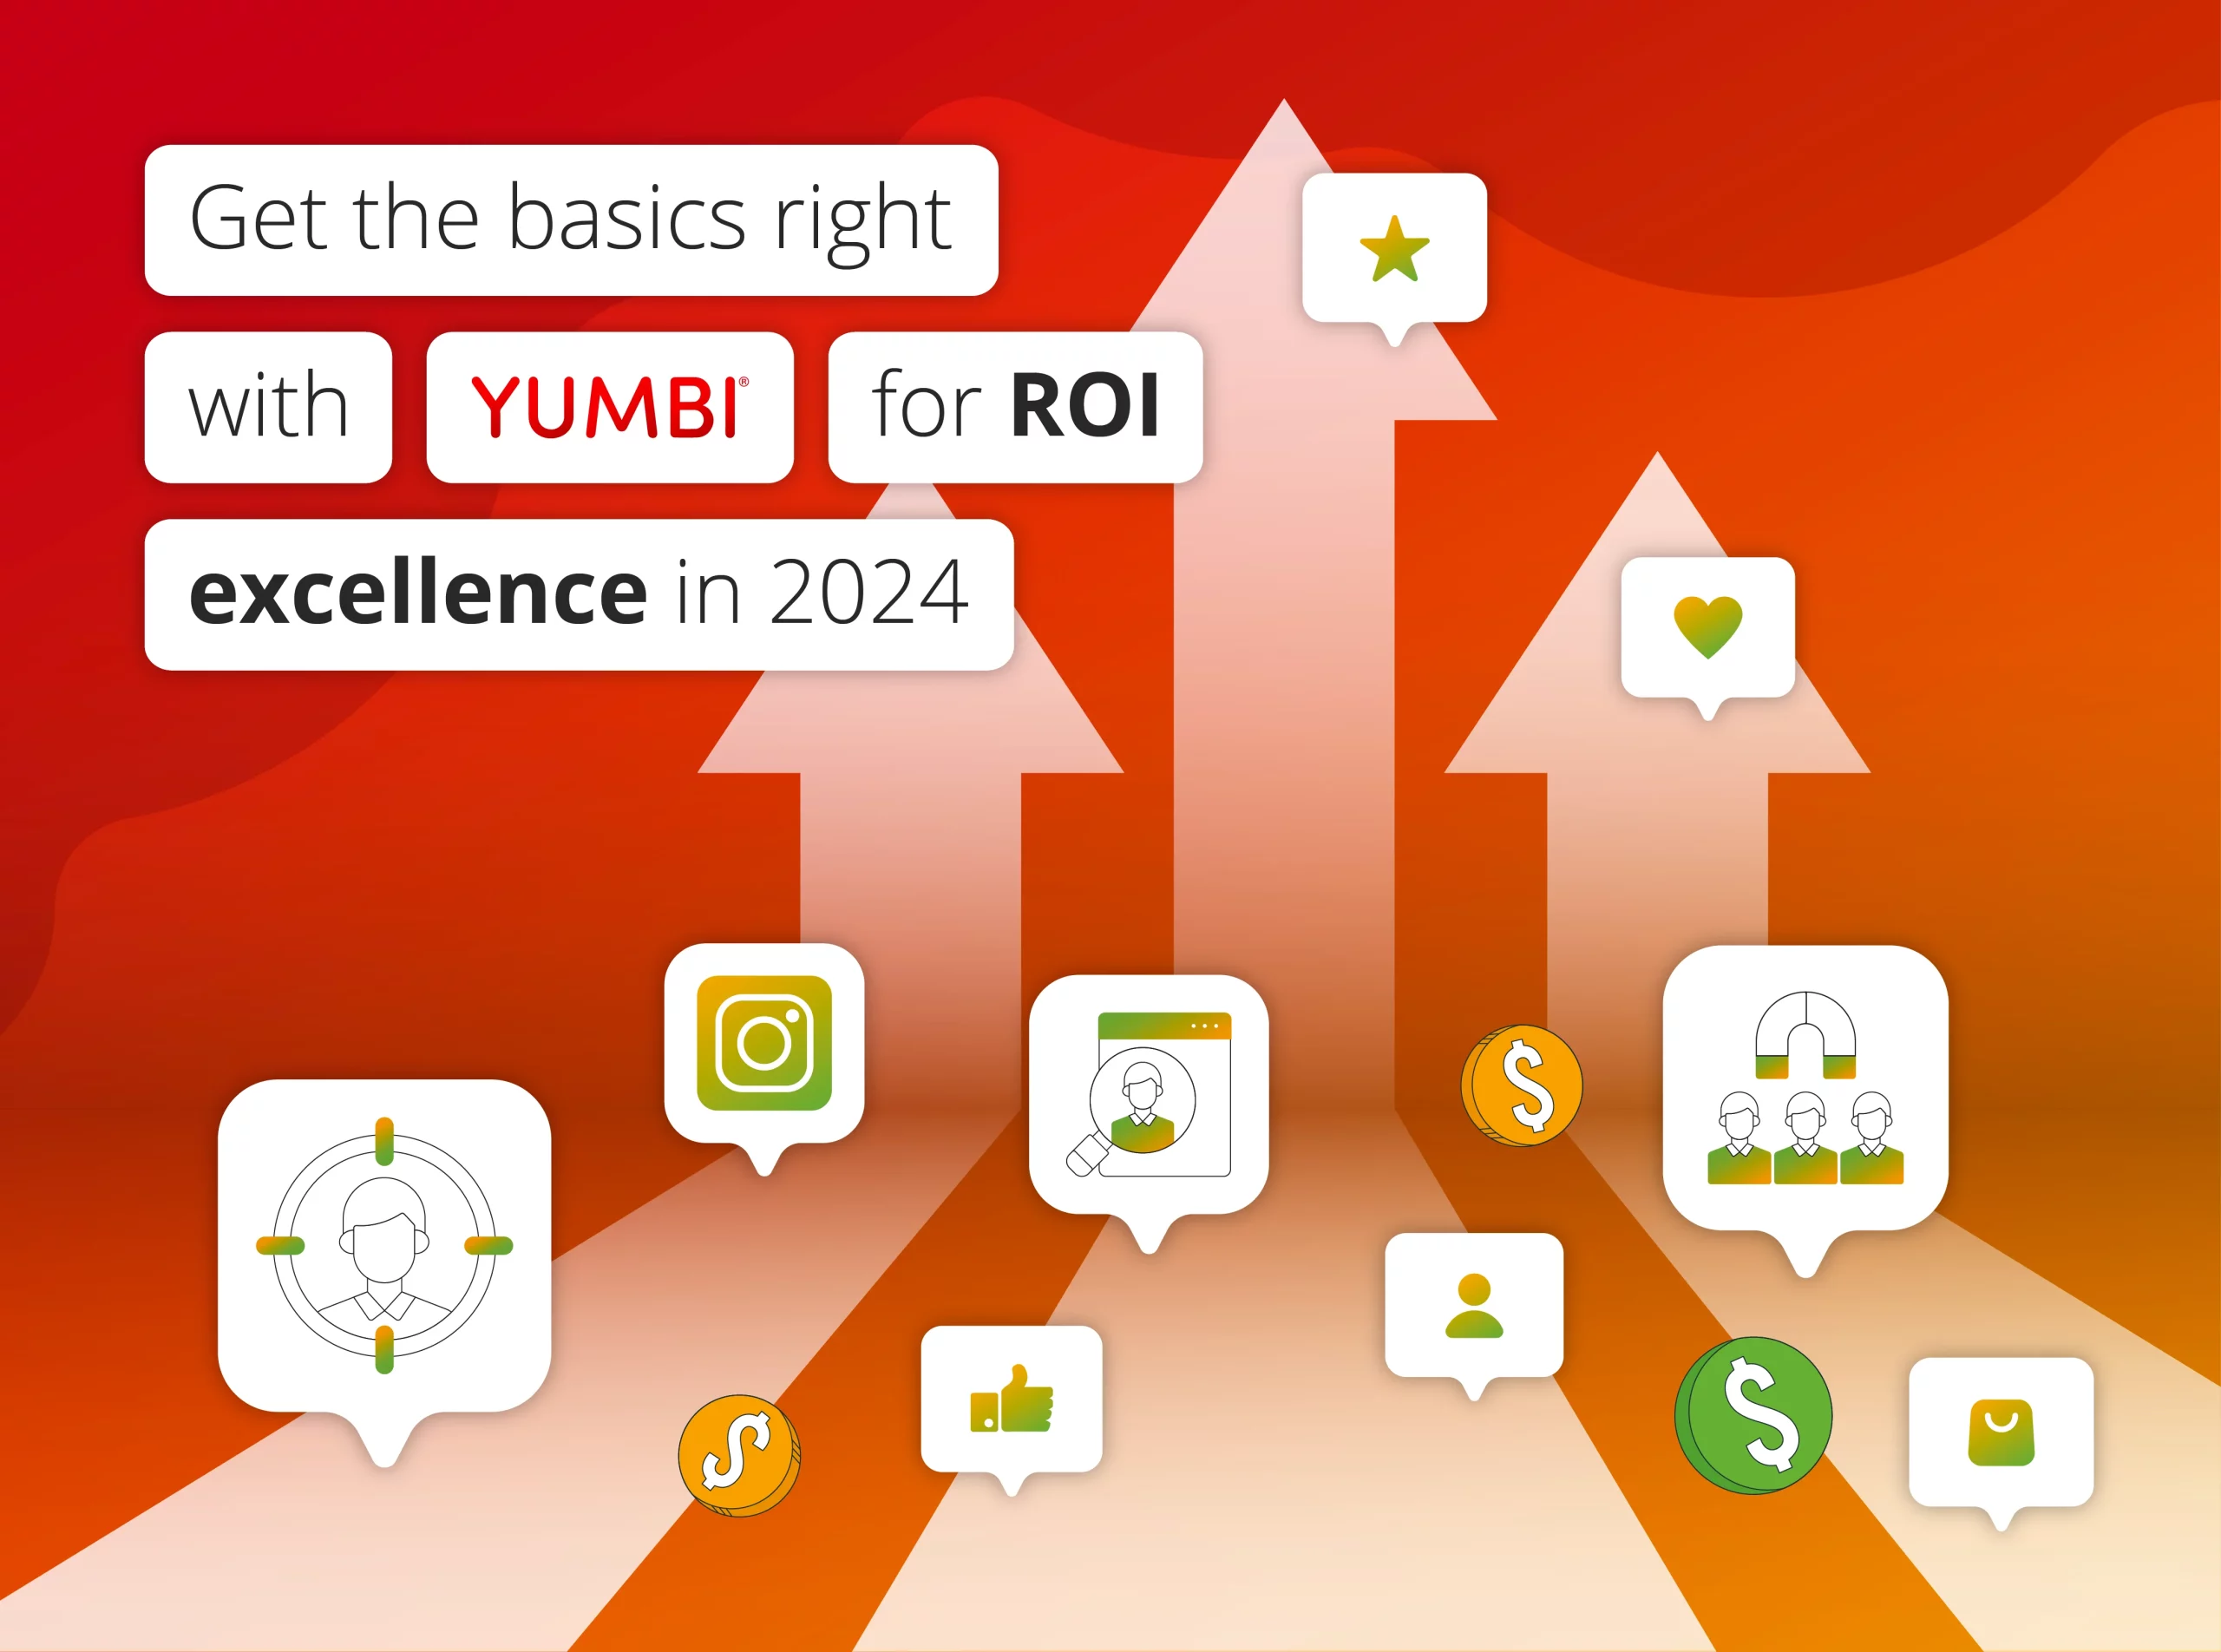 Get the basics right with YUMBI for ROI excellence in 2024